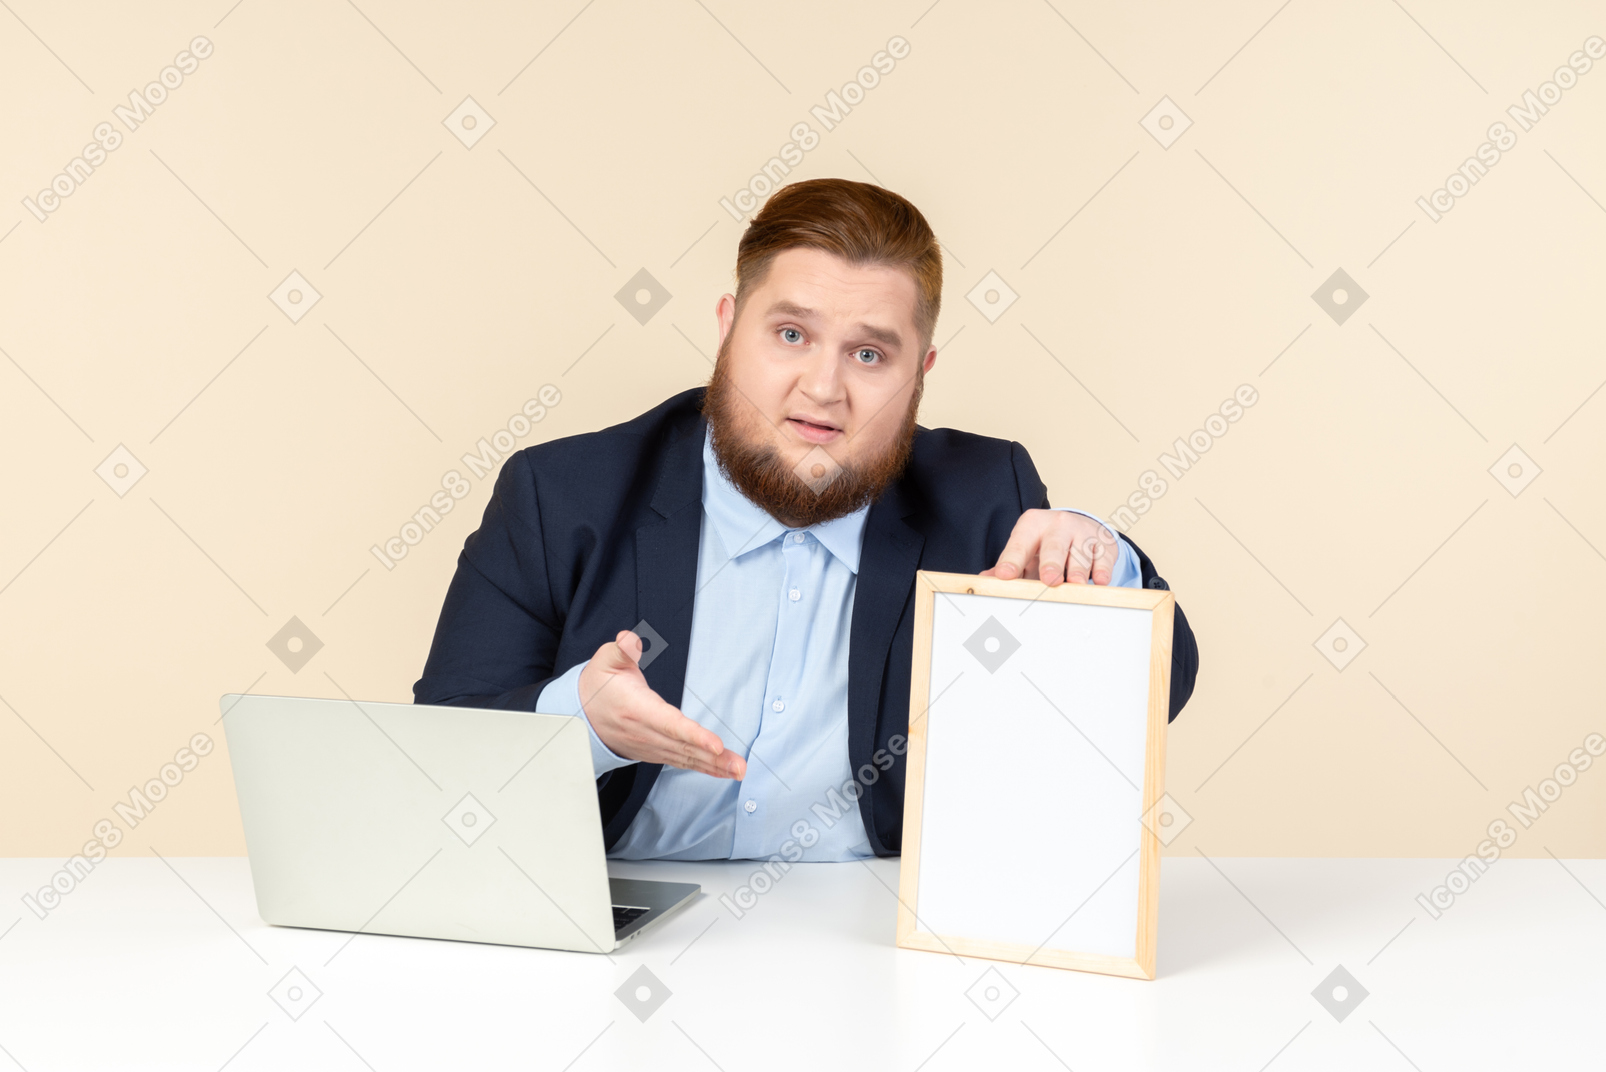 Young overweight man sitting in front of laptop and pointing at picture